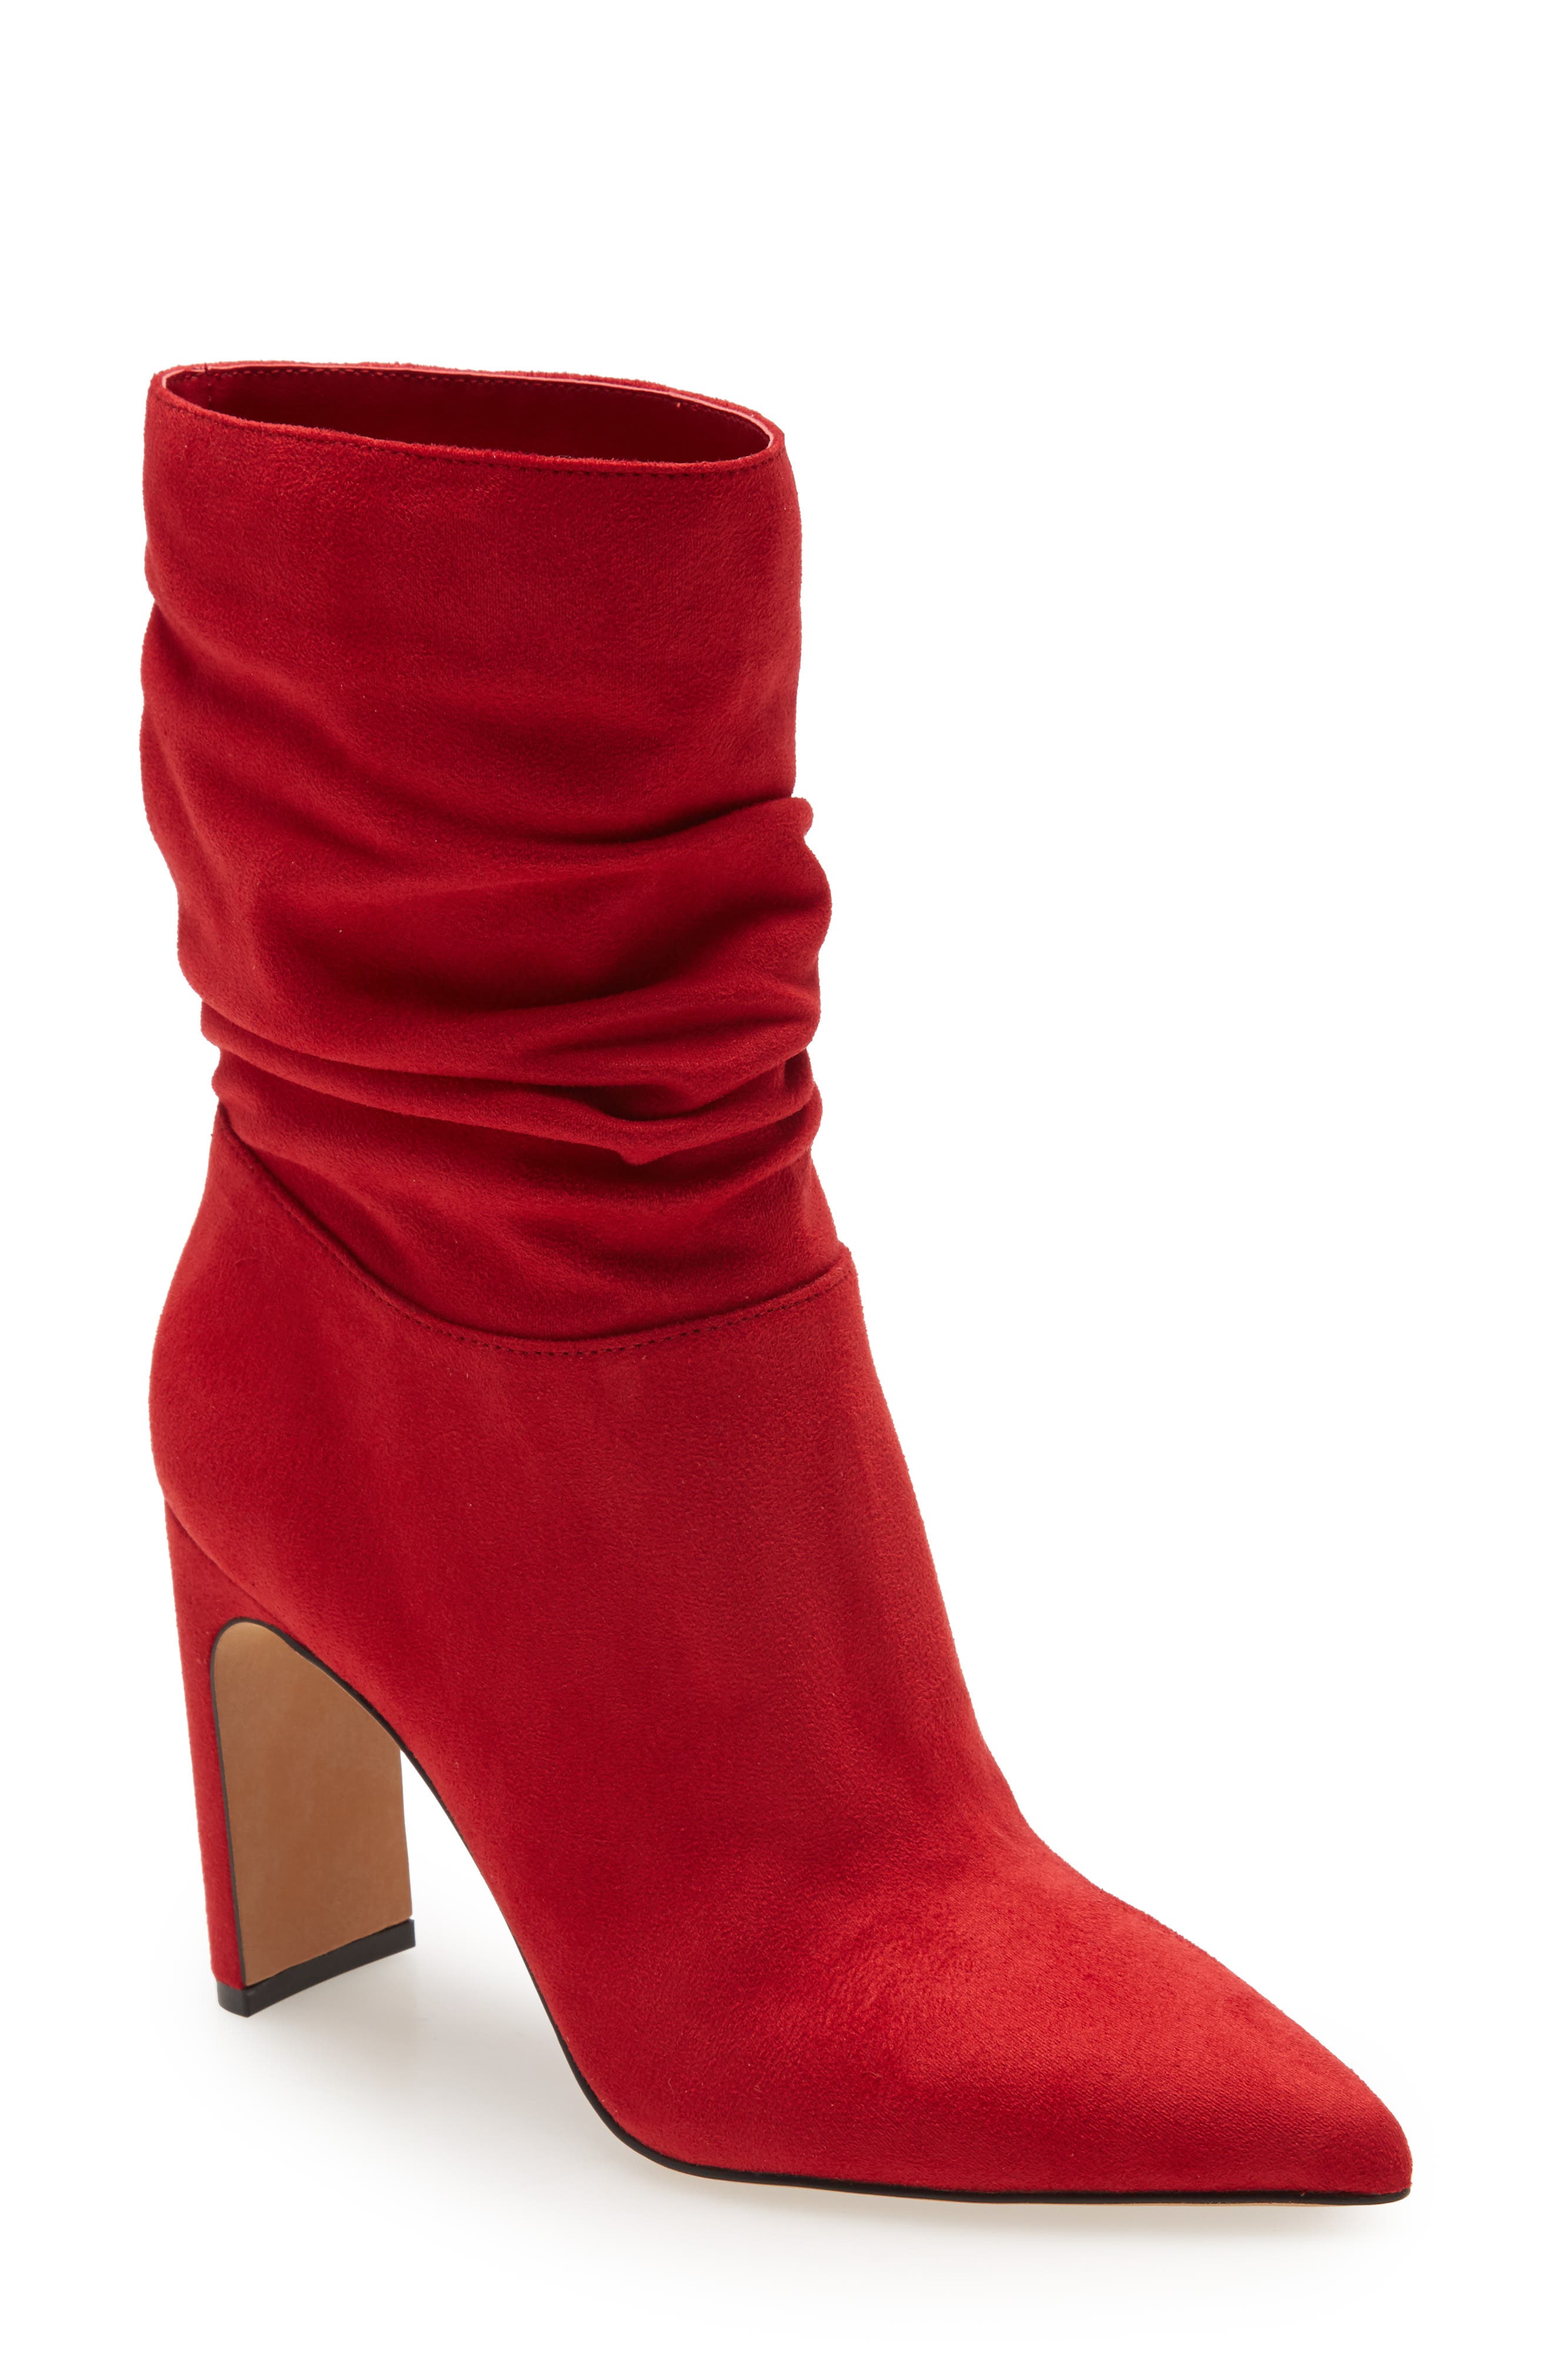 Women's Red Booties \u0026 Ankle Boots 